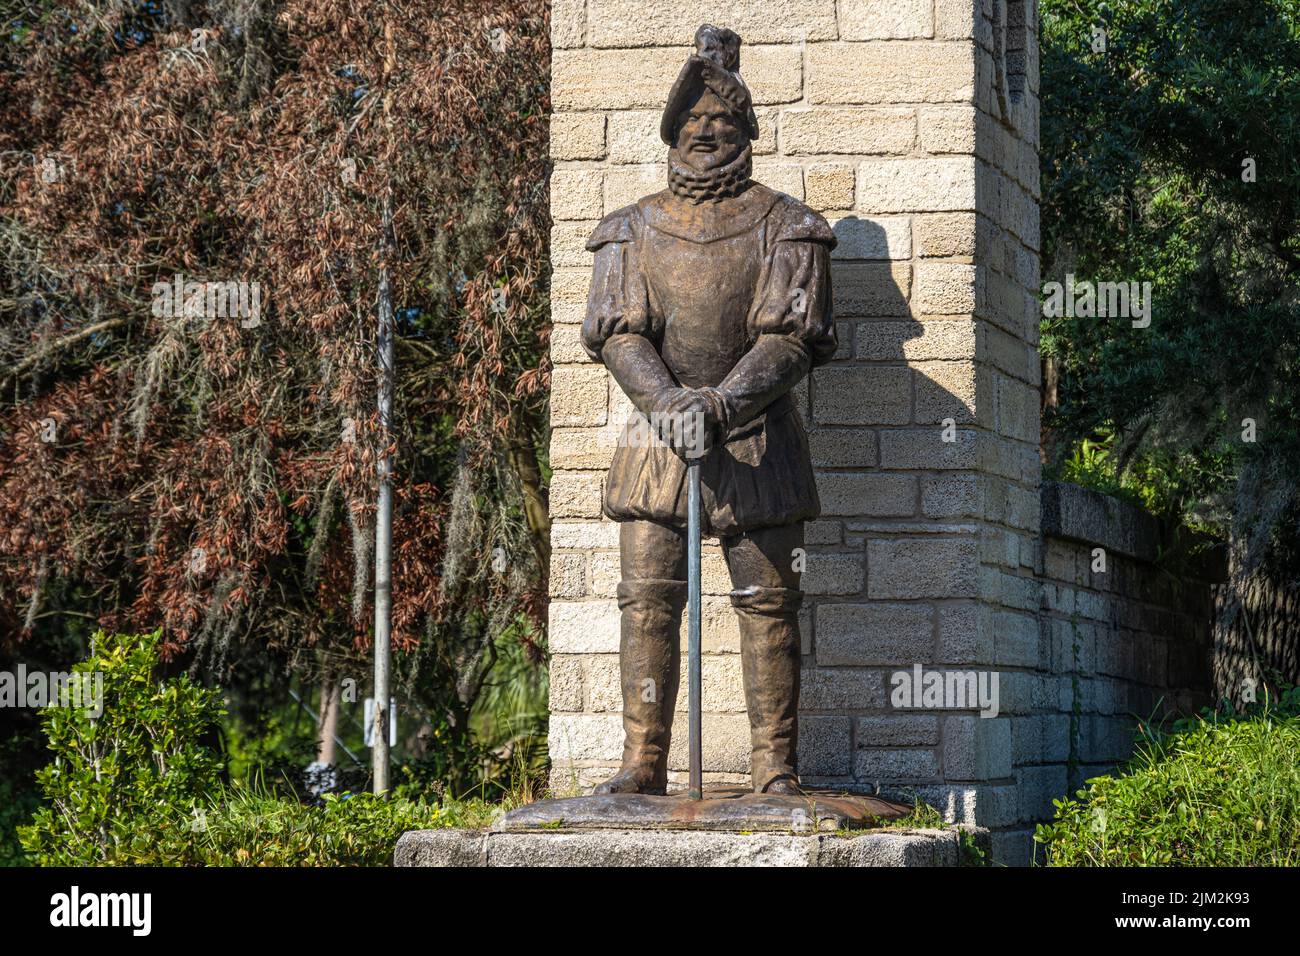 Statue of Don Pedro Menendez de Aviles, the Spanish admiral and explorer who founded St. Augustine, at the entrance gate to the city of St. Augustine. Stock Photo